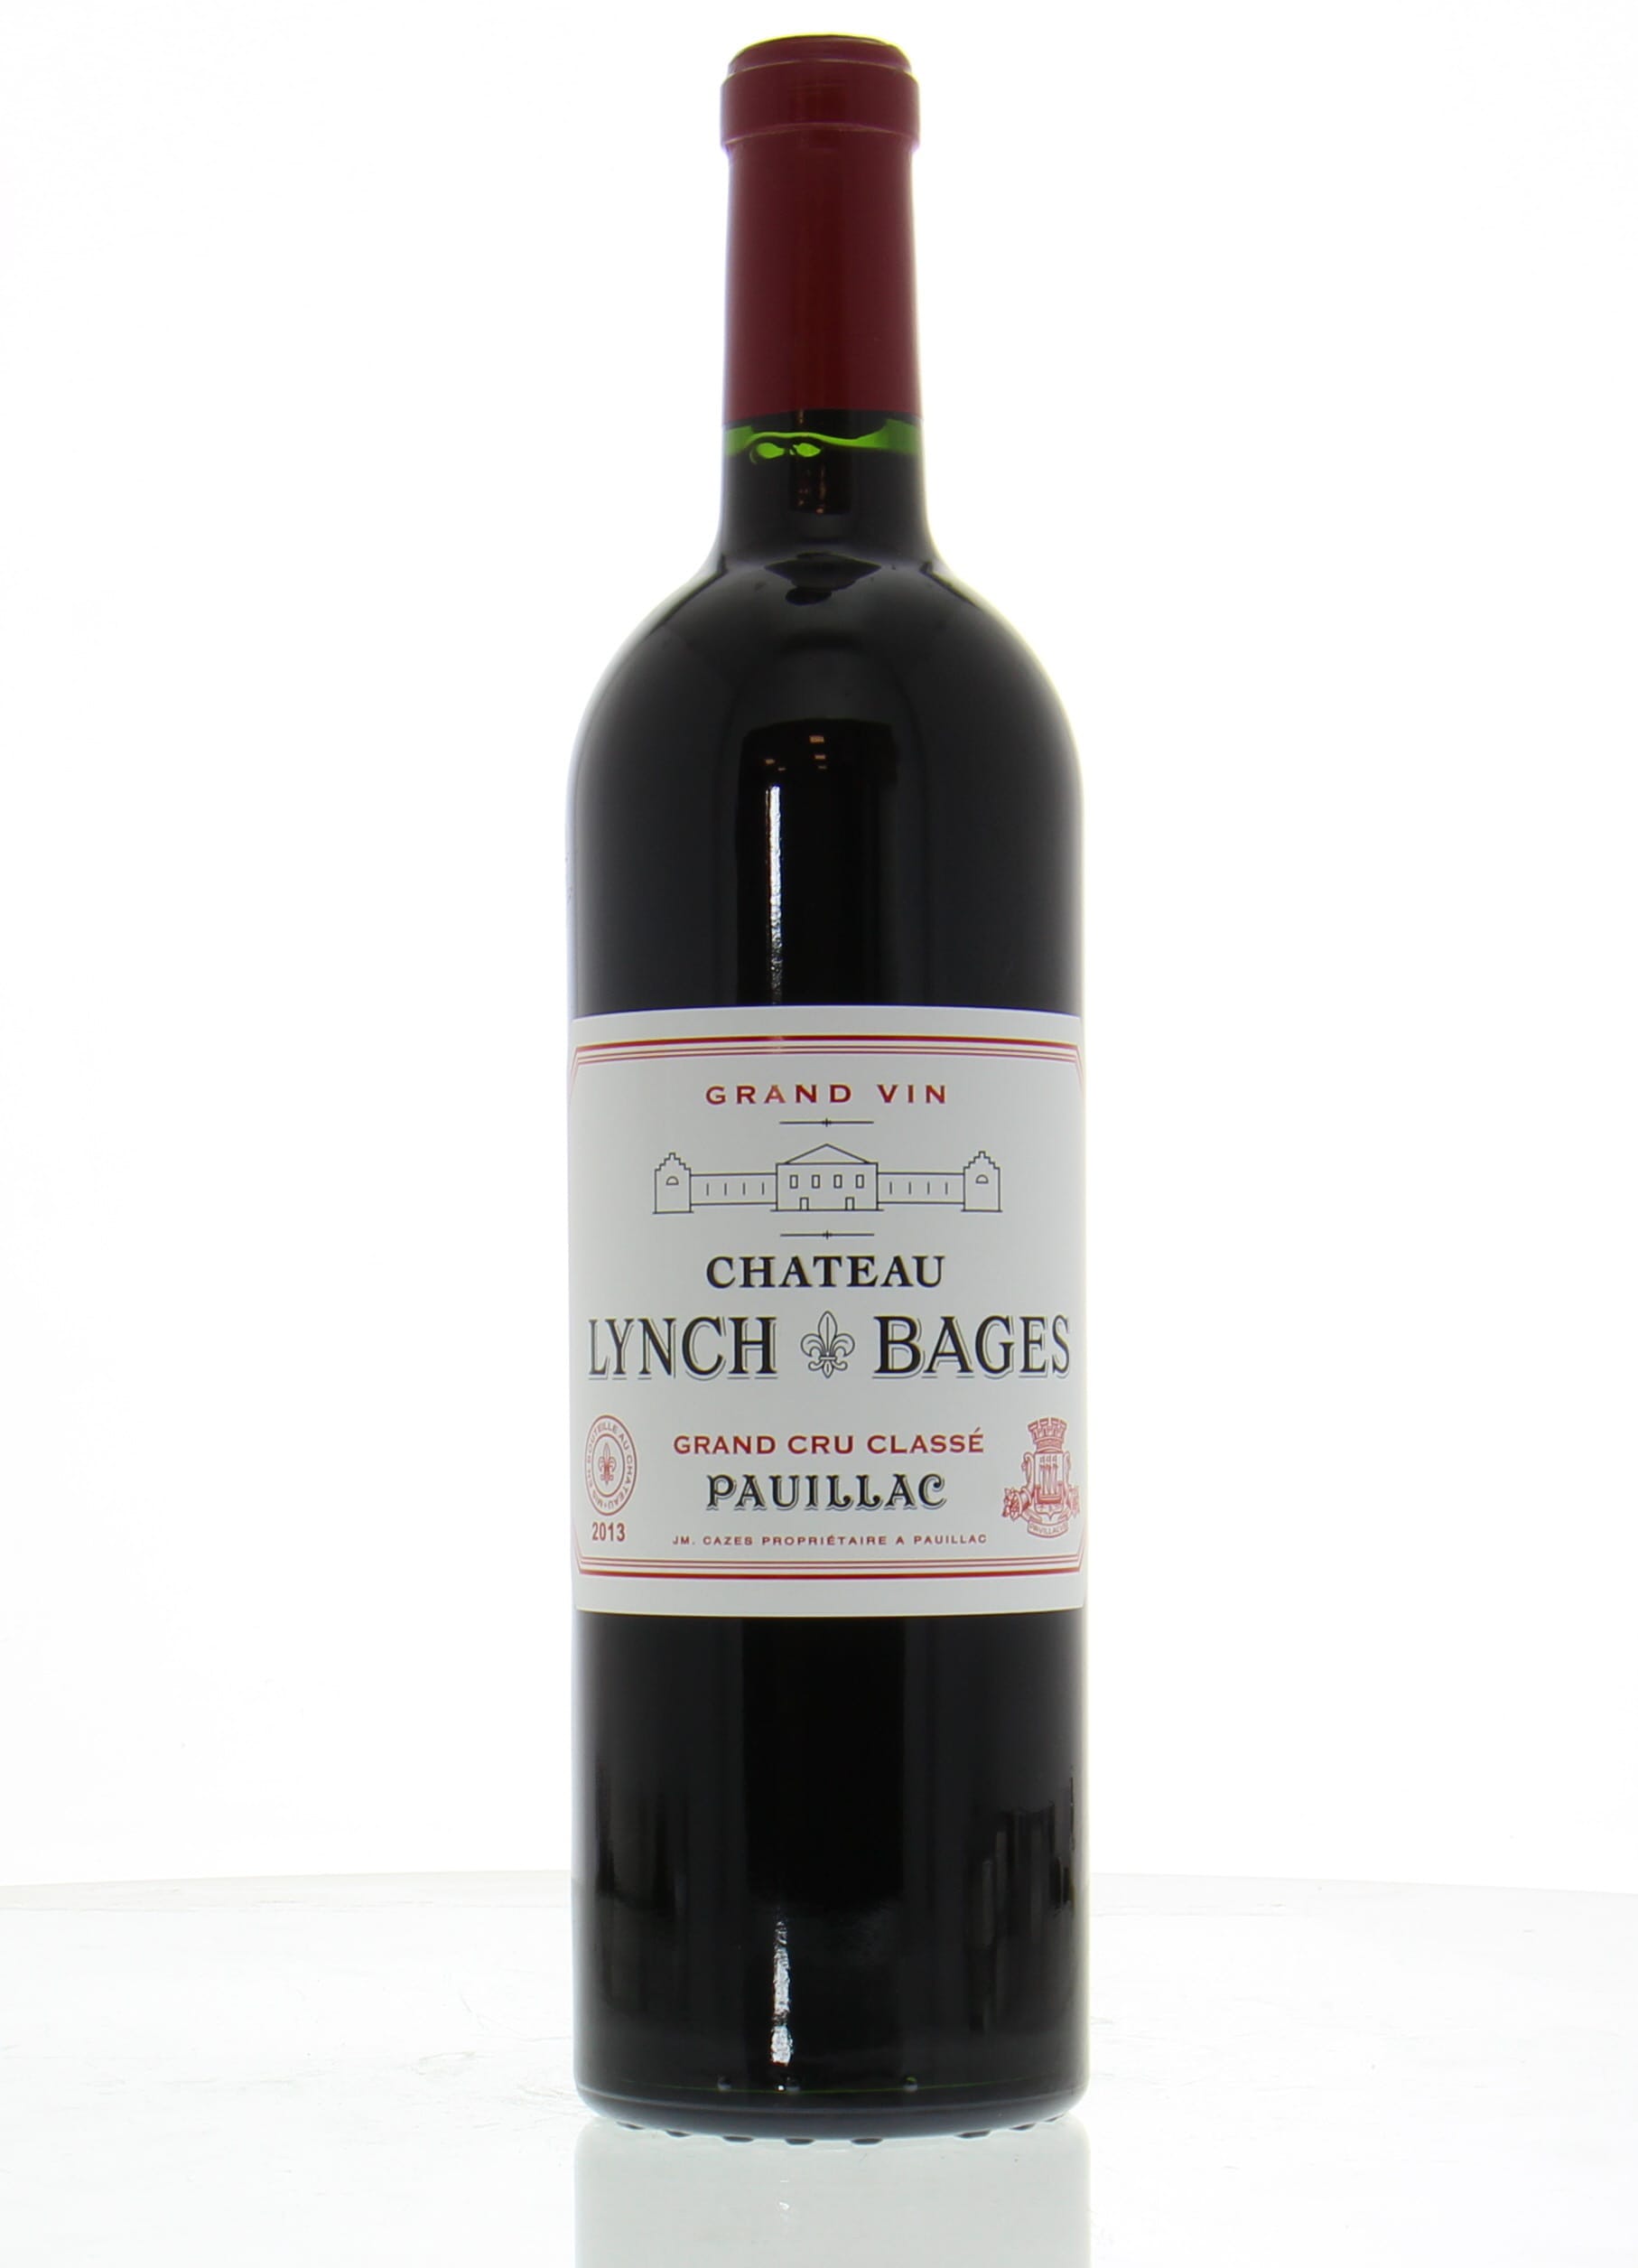 Chateau Lynch Bages - Chateau Lynch Bages 2013